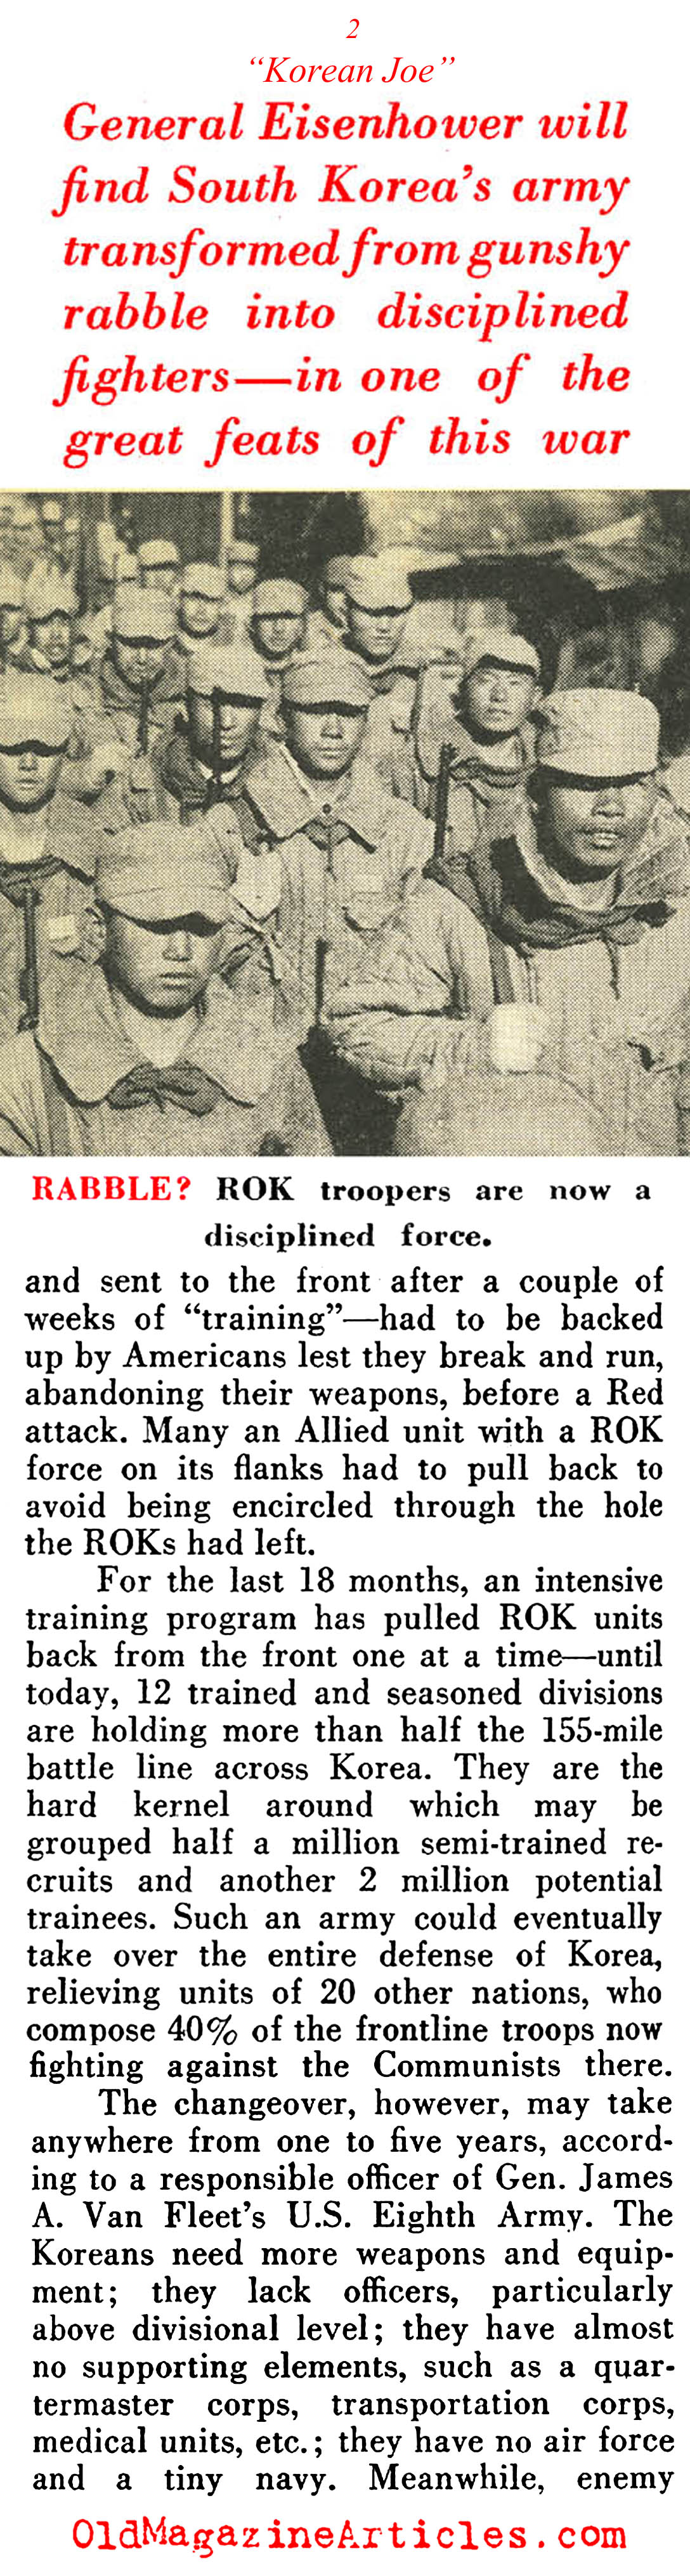 The Reformed South Korean Military (Pathfinder Magazine, 1952)